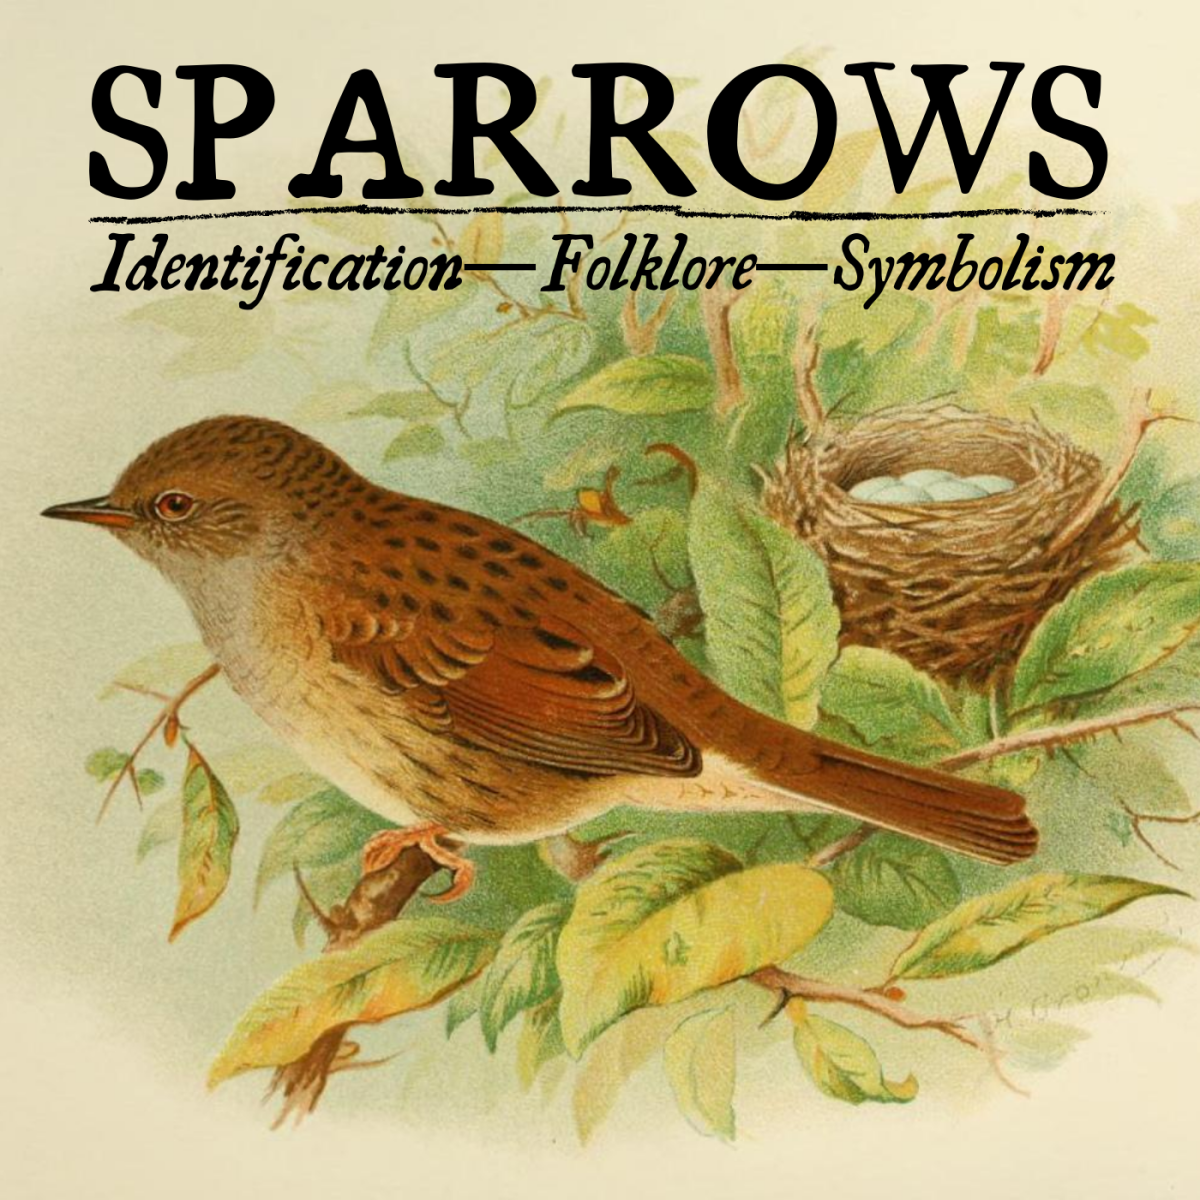 What does it mean when a sparrow nests in Your House?